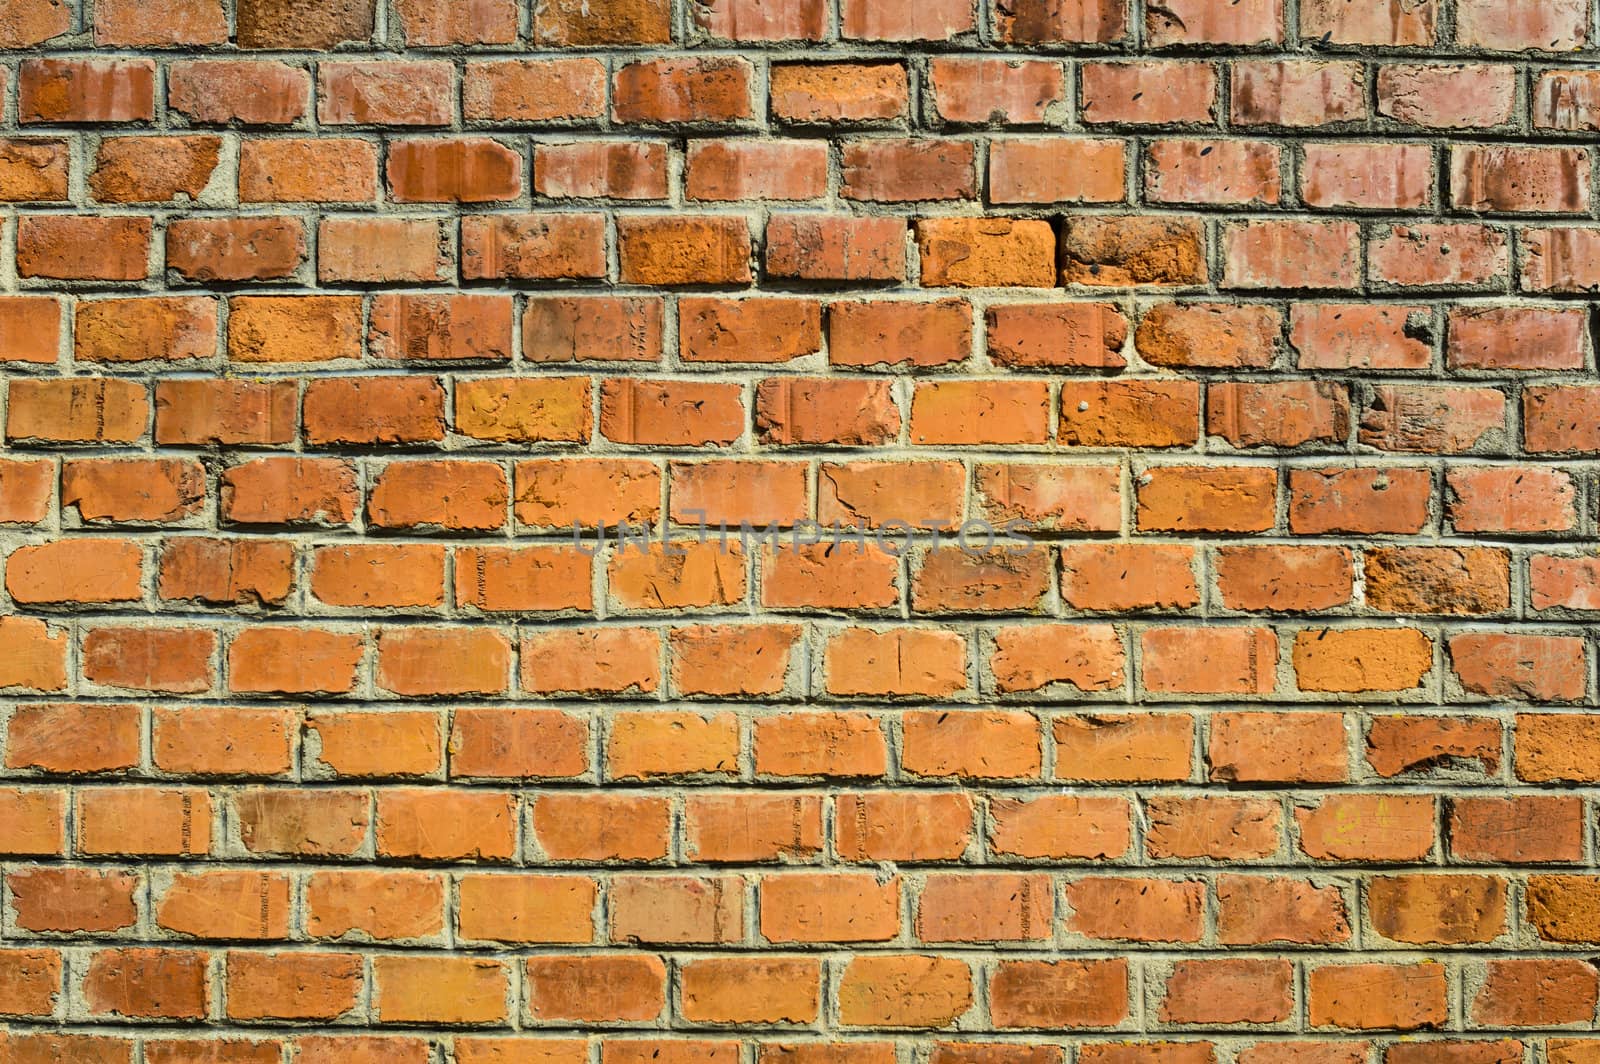 Orange brick  wall for backgrounds